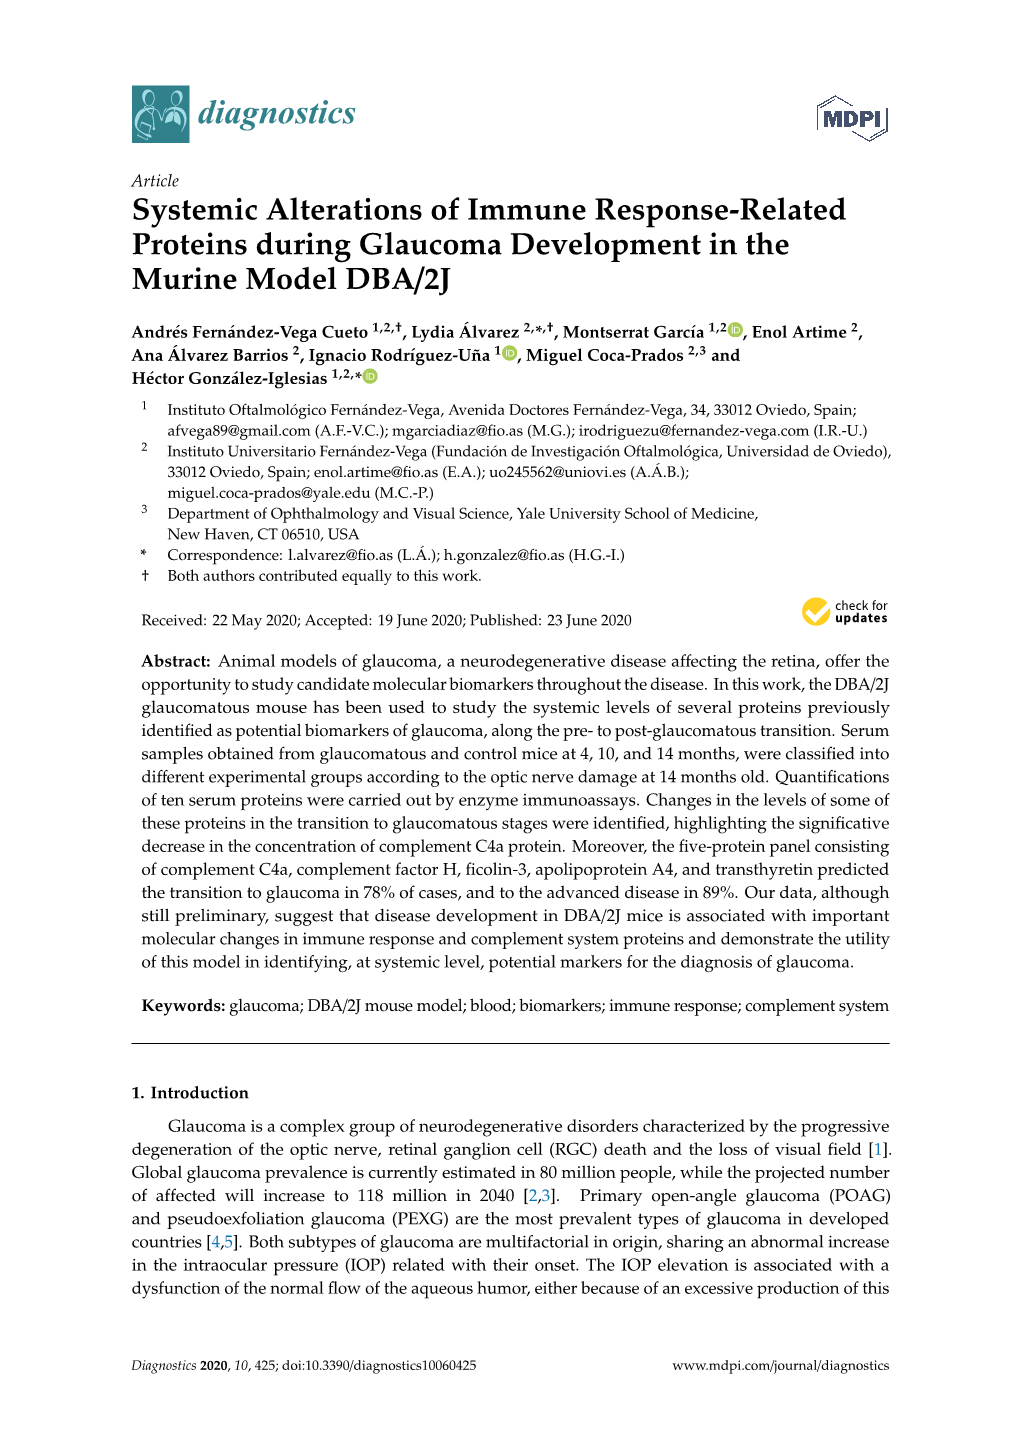 Systemic Alterations of Immune Response-Related Proteins During Glaucoma Development in the Murine Model DBA/2J